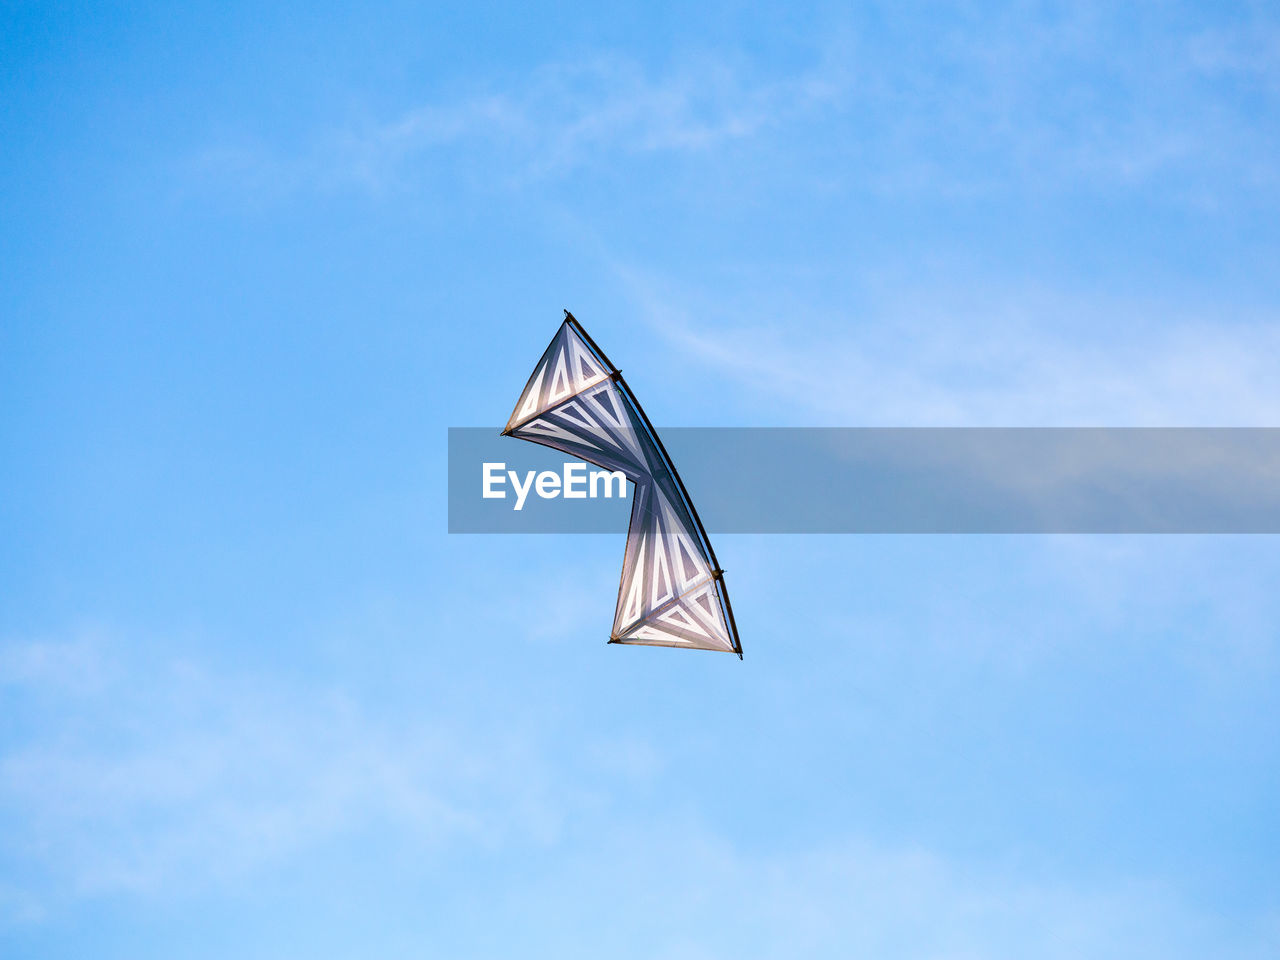 LOW ANGLE VIEW OF KITE FLYING AGAINST SKY